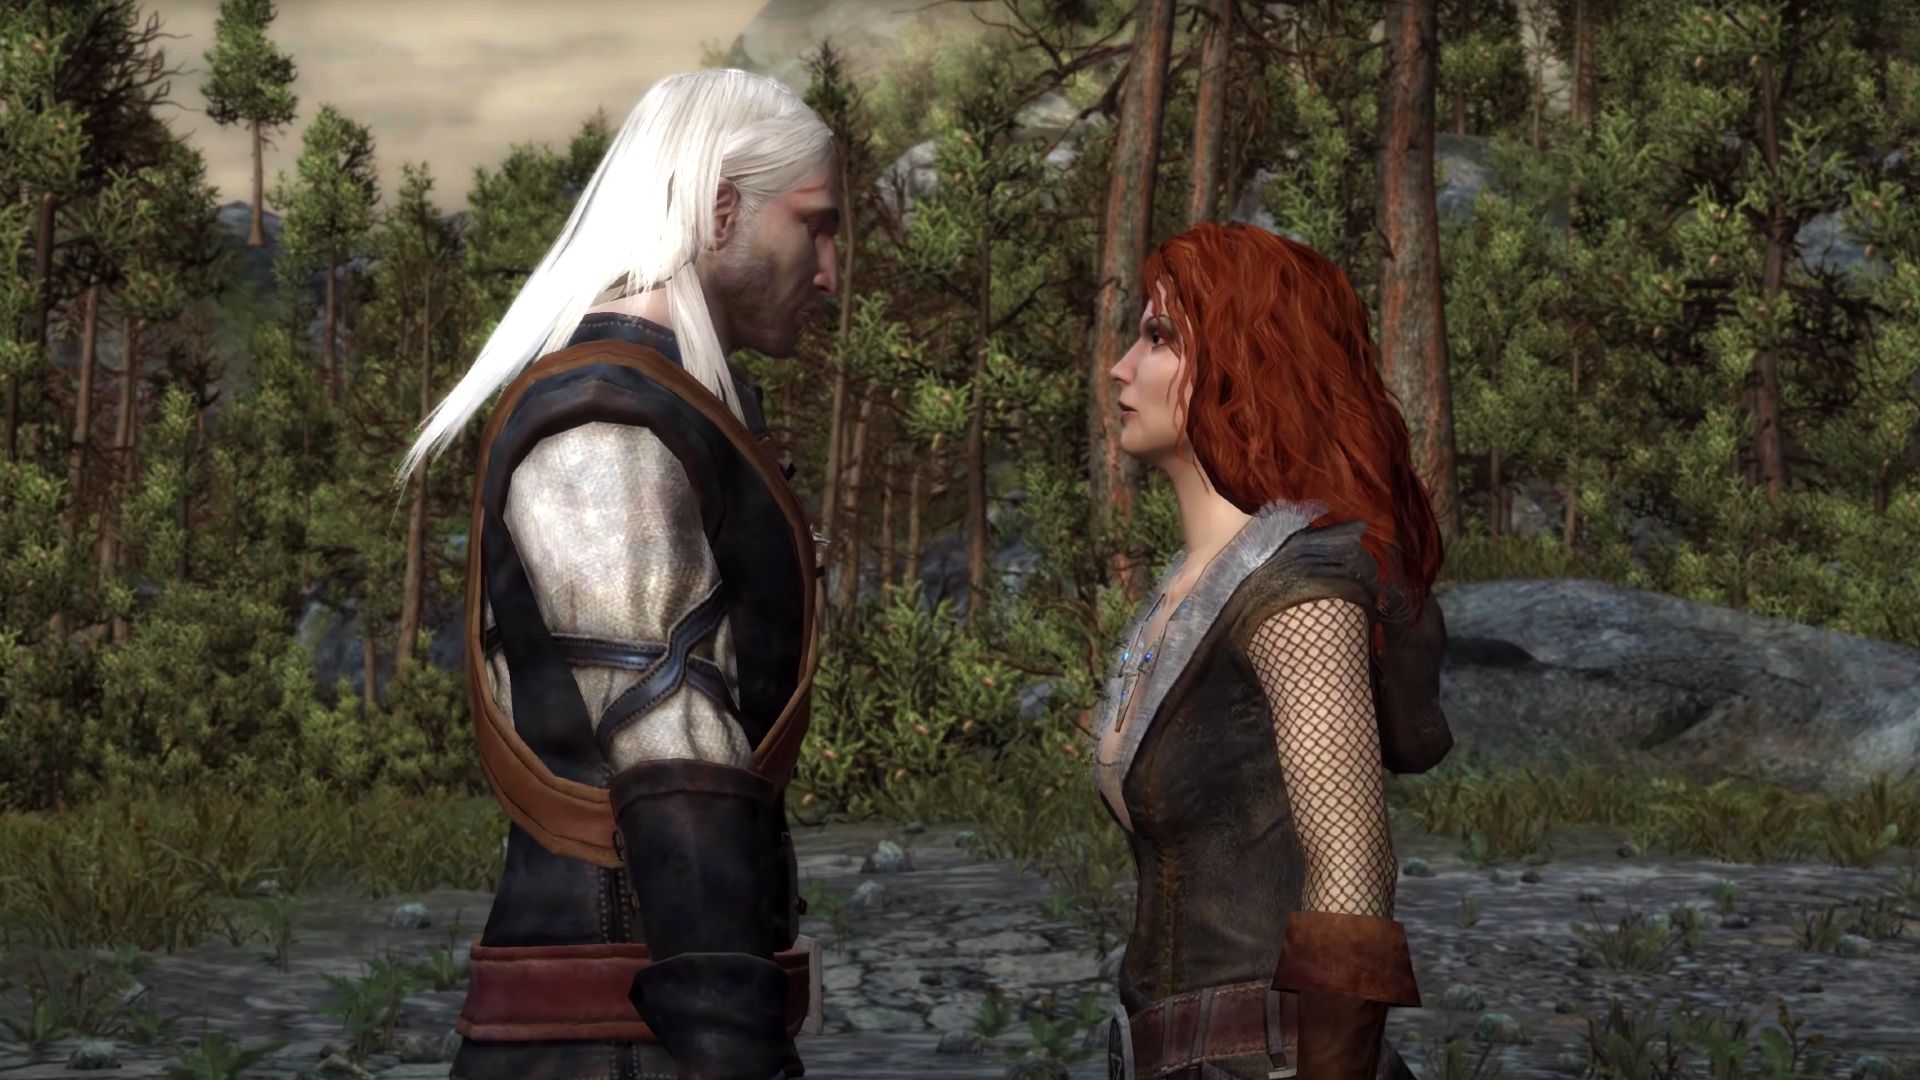 What if: CD Projekt Red remade The Witcher 1? | PCGamesN